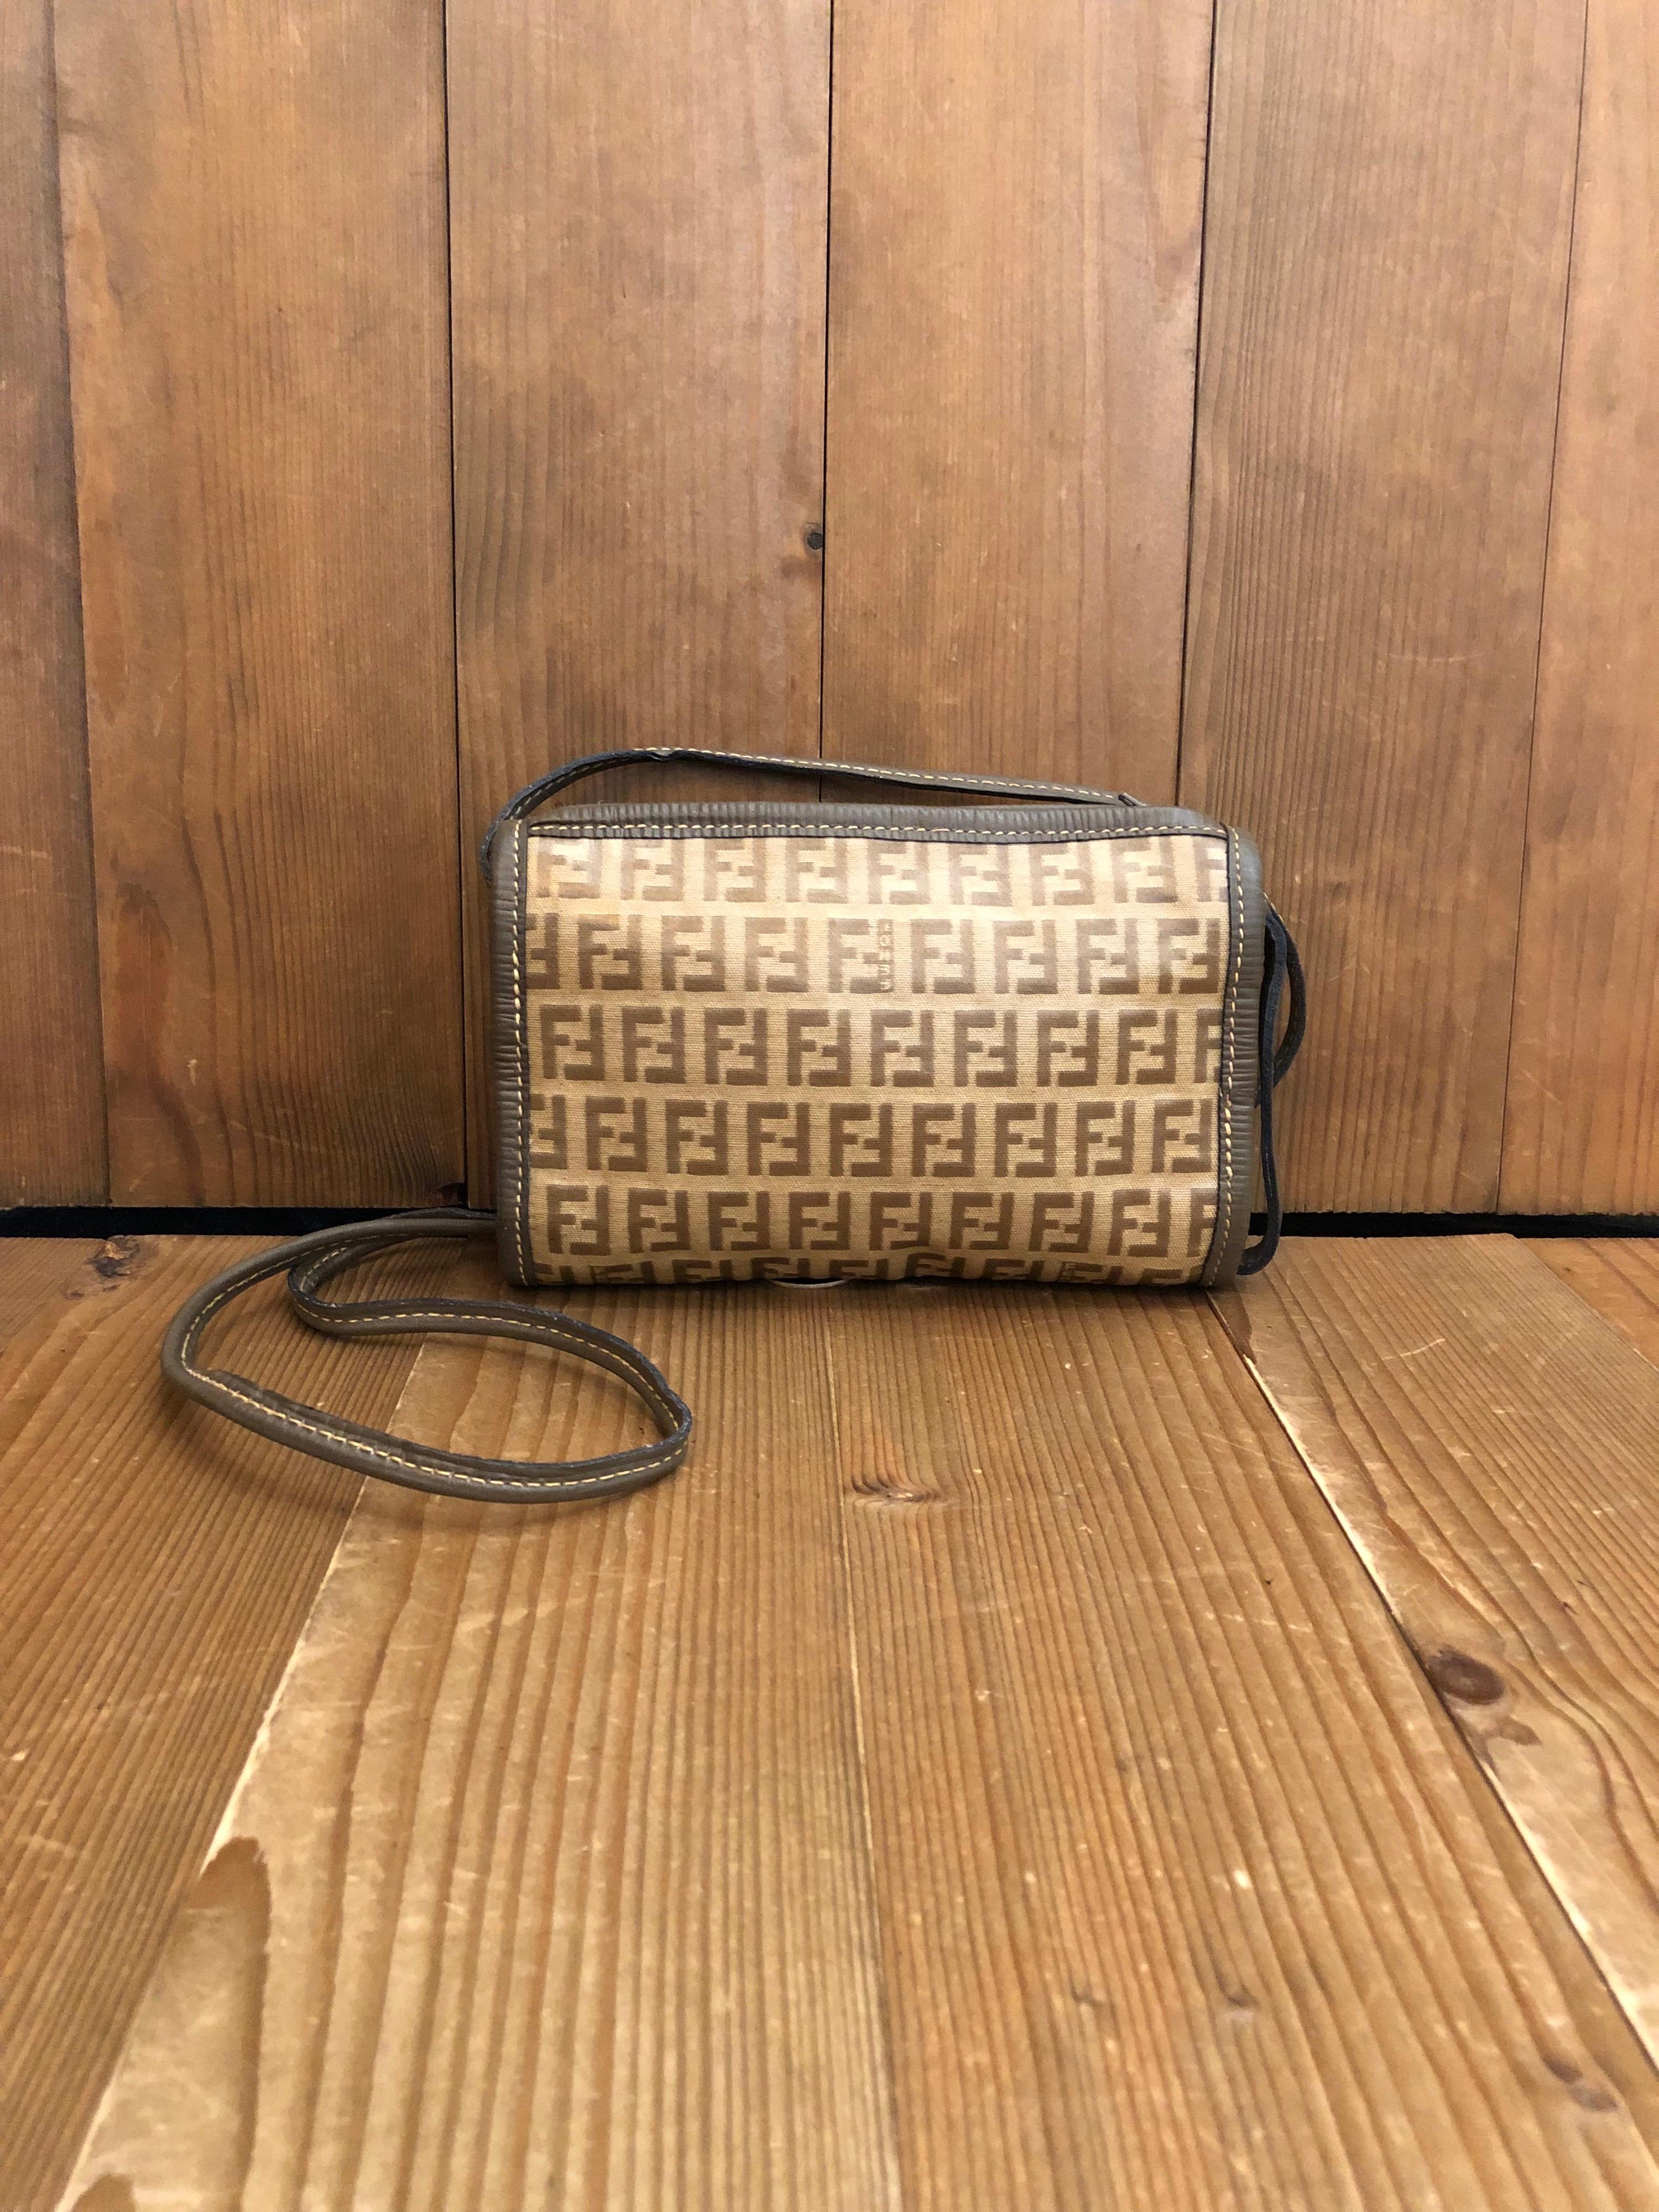 This vintage Fendi Zucchino mini crossbody bag is crafted of Fendi’s iconic Zucchino coated canvas in brown.
Made in Italy. Measures approximately 7.25 x 4.5 x 1.5 inches Drop 22 inches. 

Condition: Minor signs of wear. Generally in good condition.